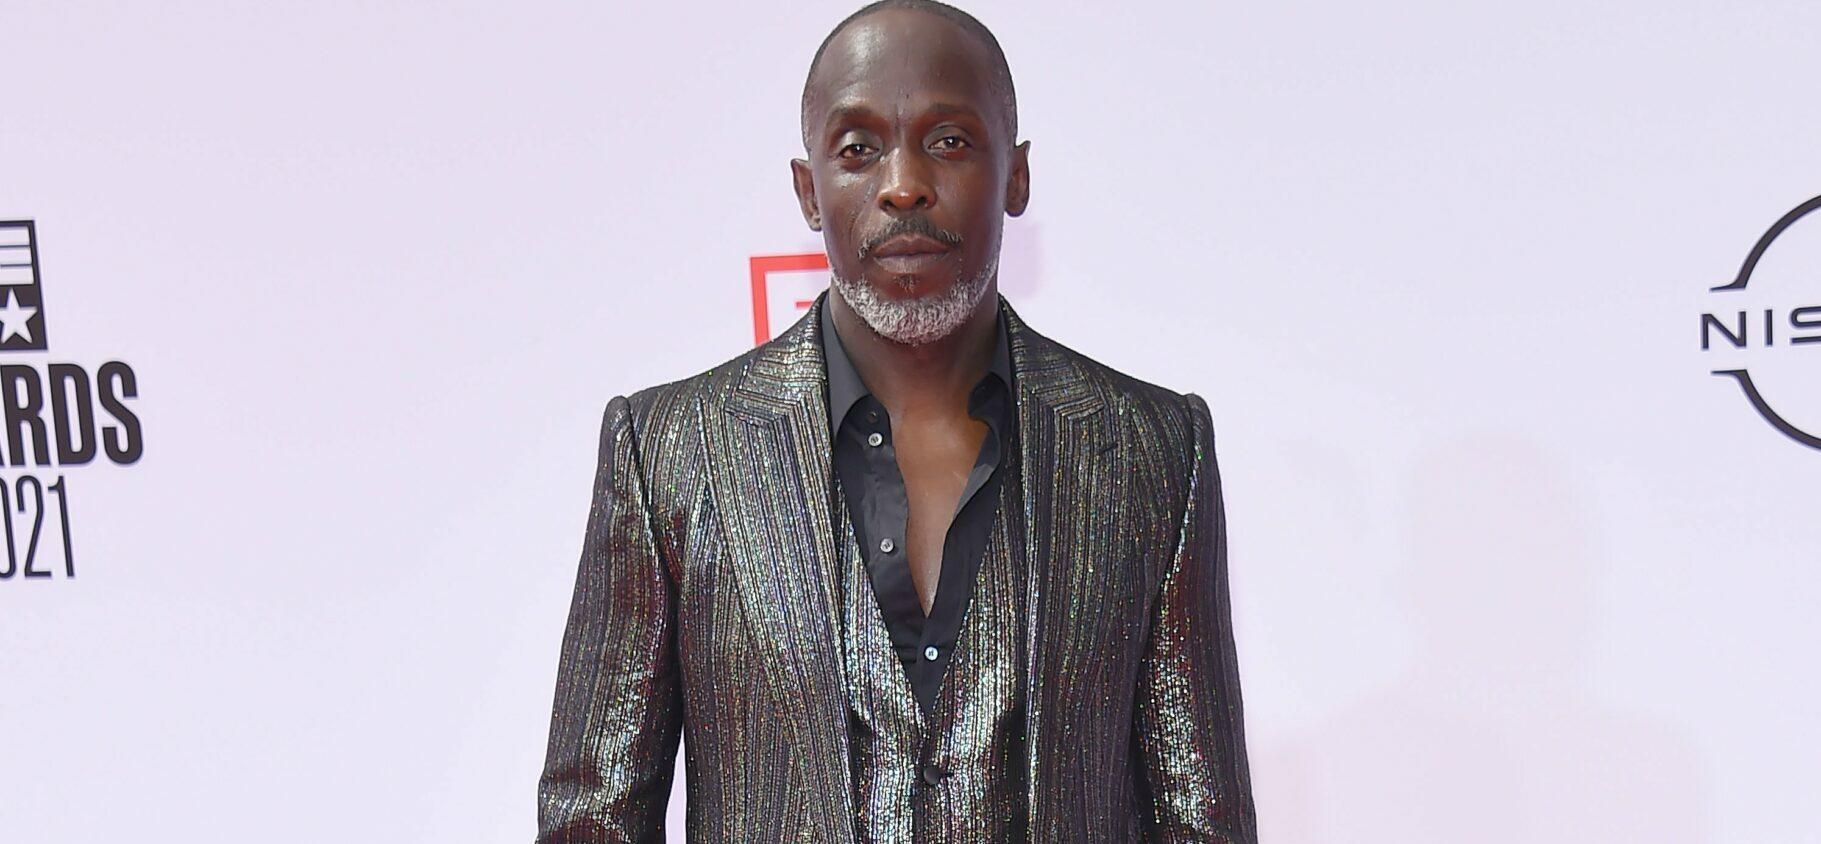 Pee-Wee Herman Mourns The Death Of Michael K. Williams, 'I Loved Him'